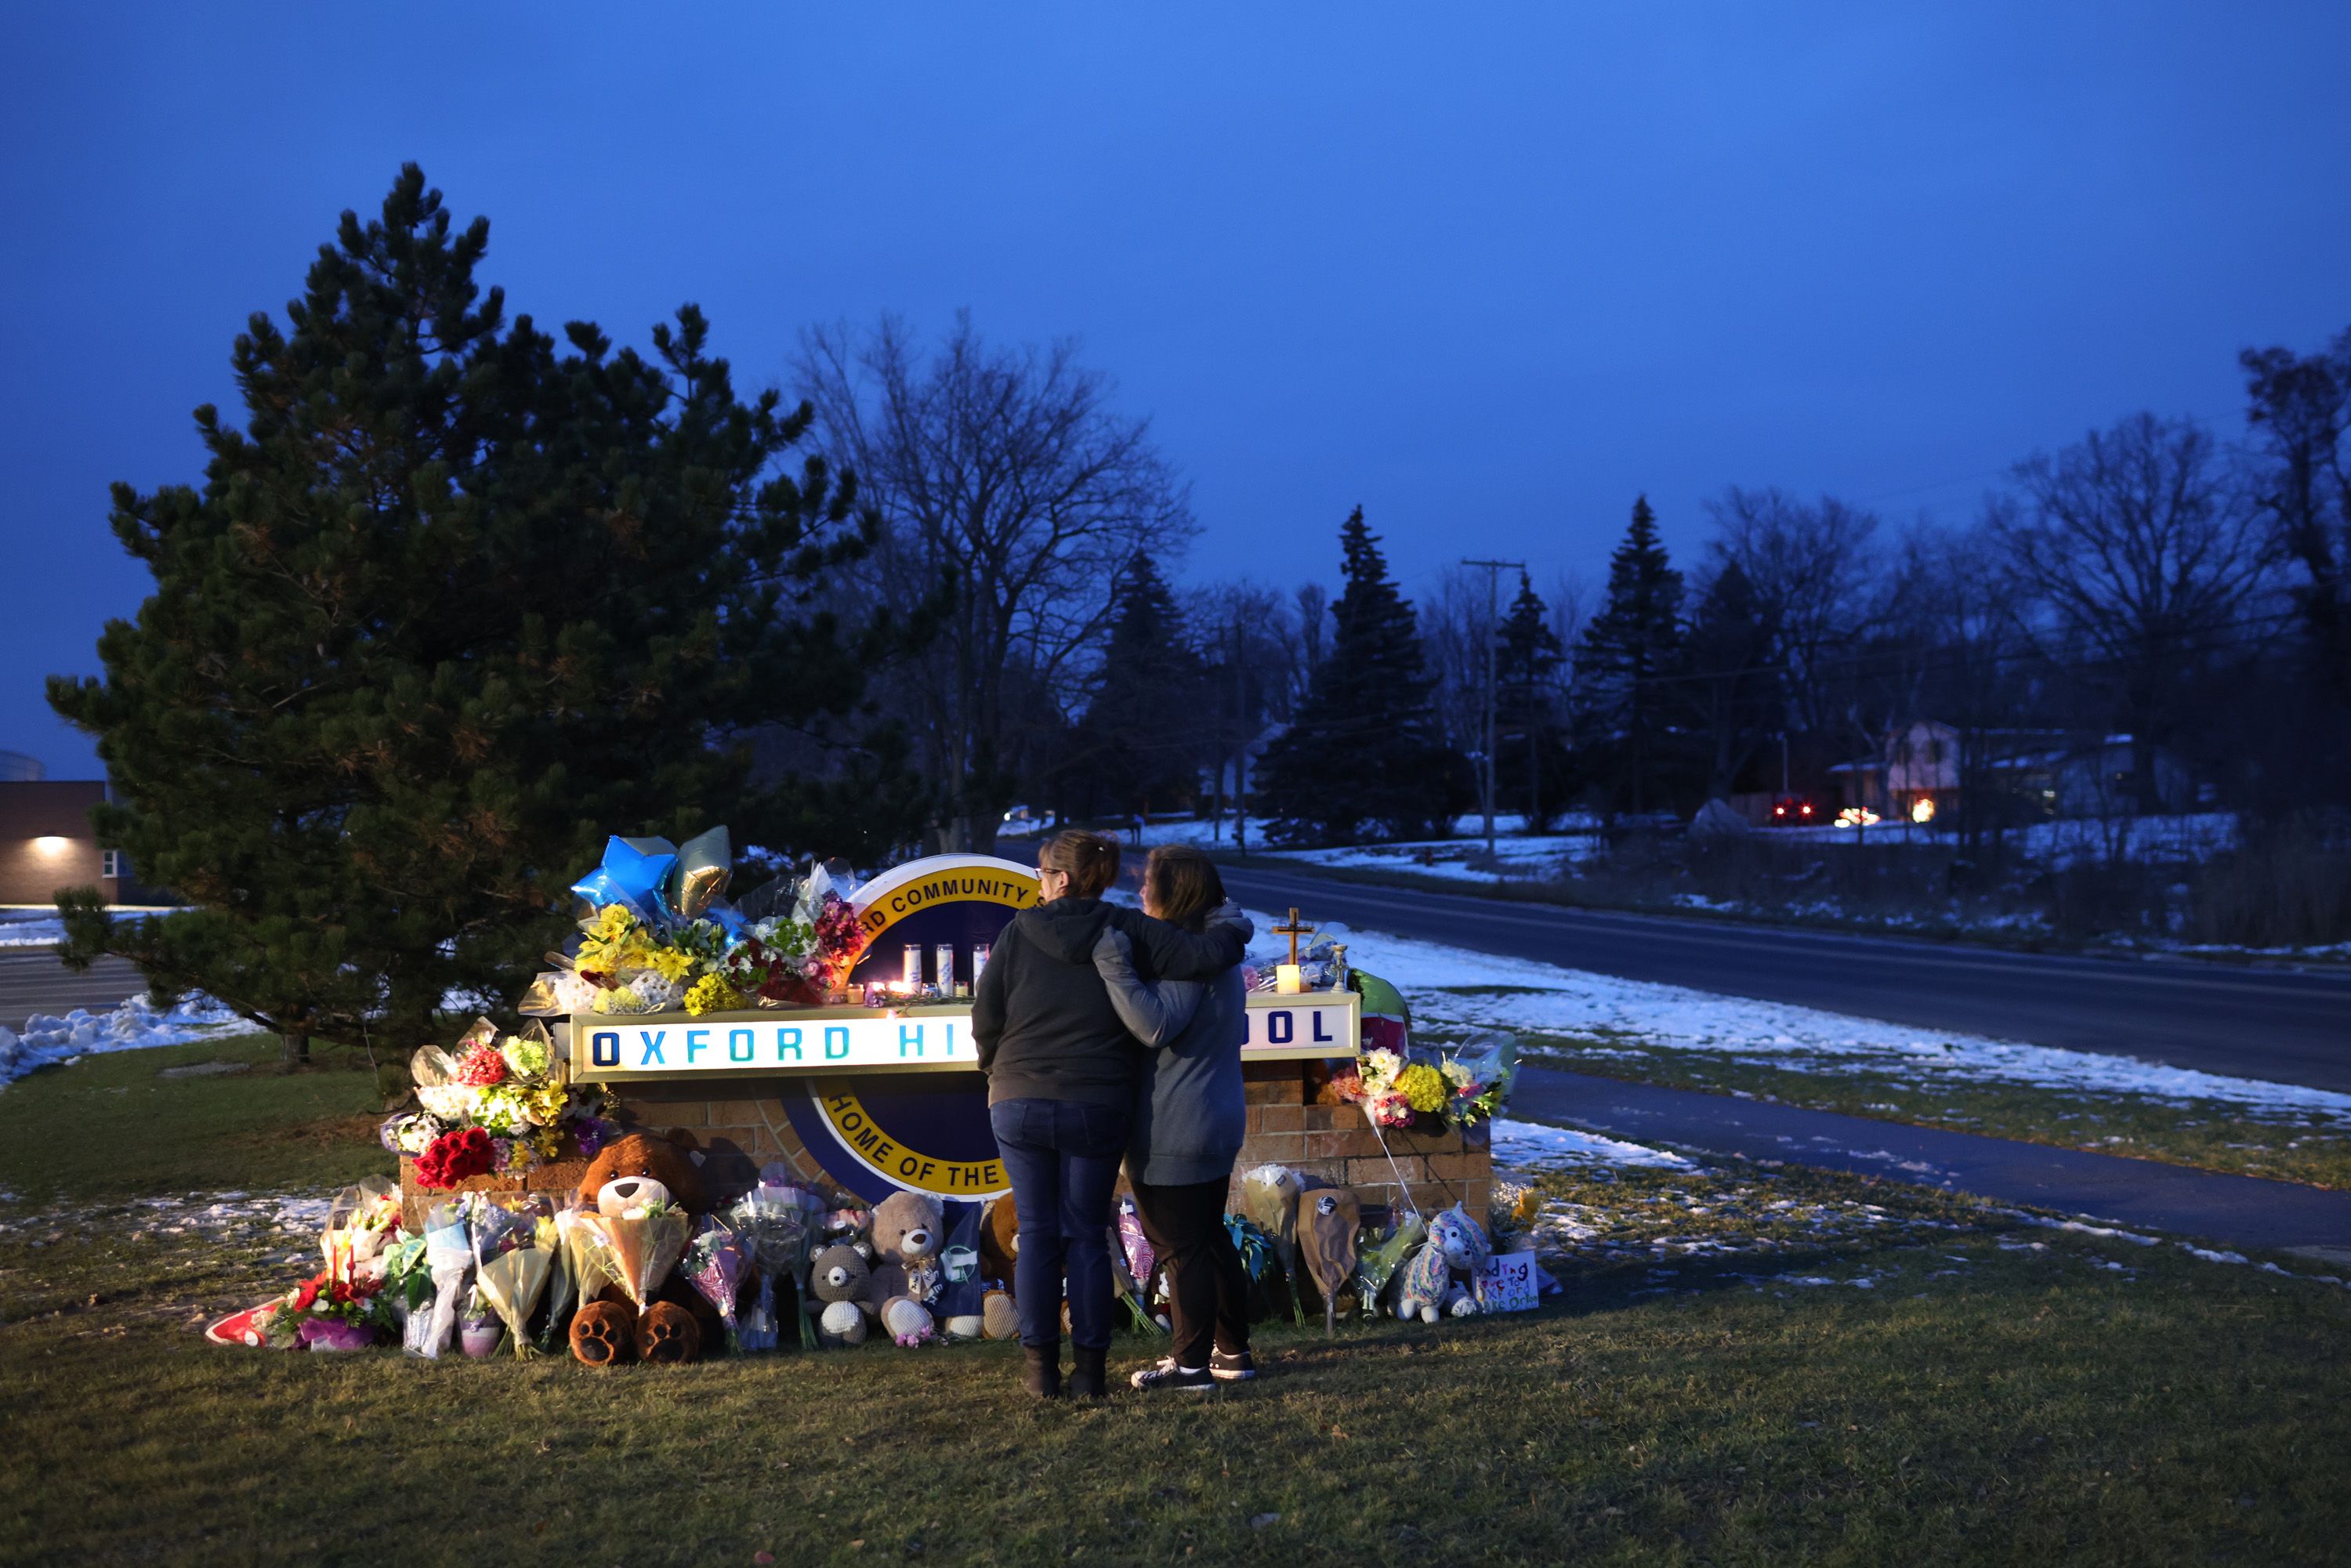 The Michigan School Shooting Story Is Getting Worse and Worse